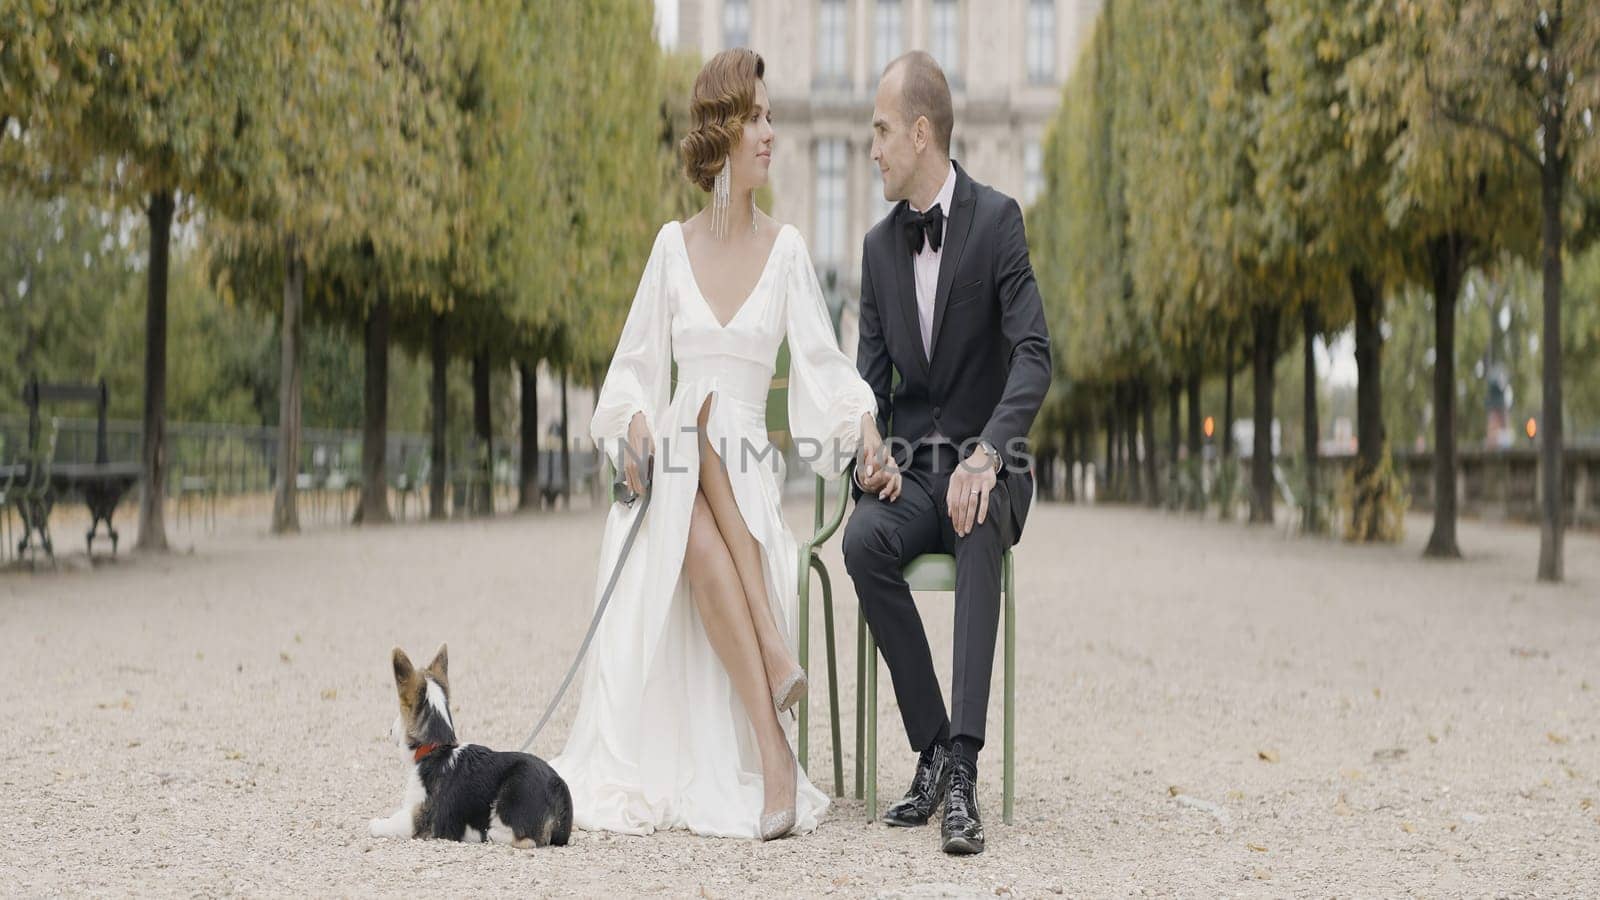 Groom and bride walking with a small dog in park. Action. Funny pet outdoors with his loving owners, man in suit and woman in white dress. by Mediawhalestock